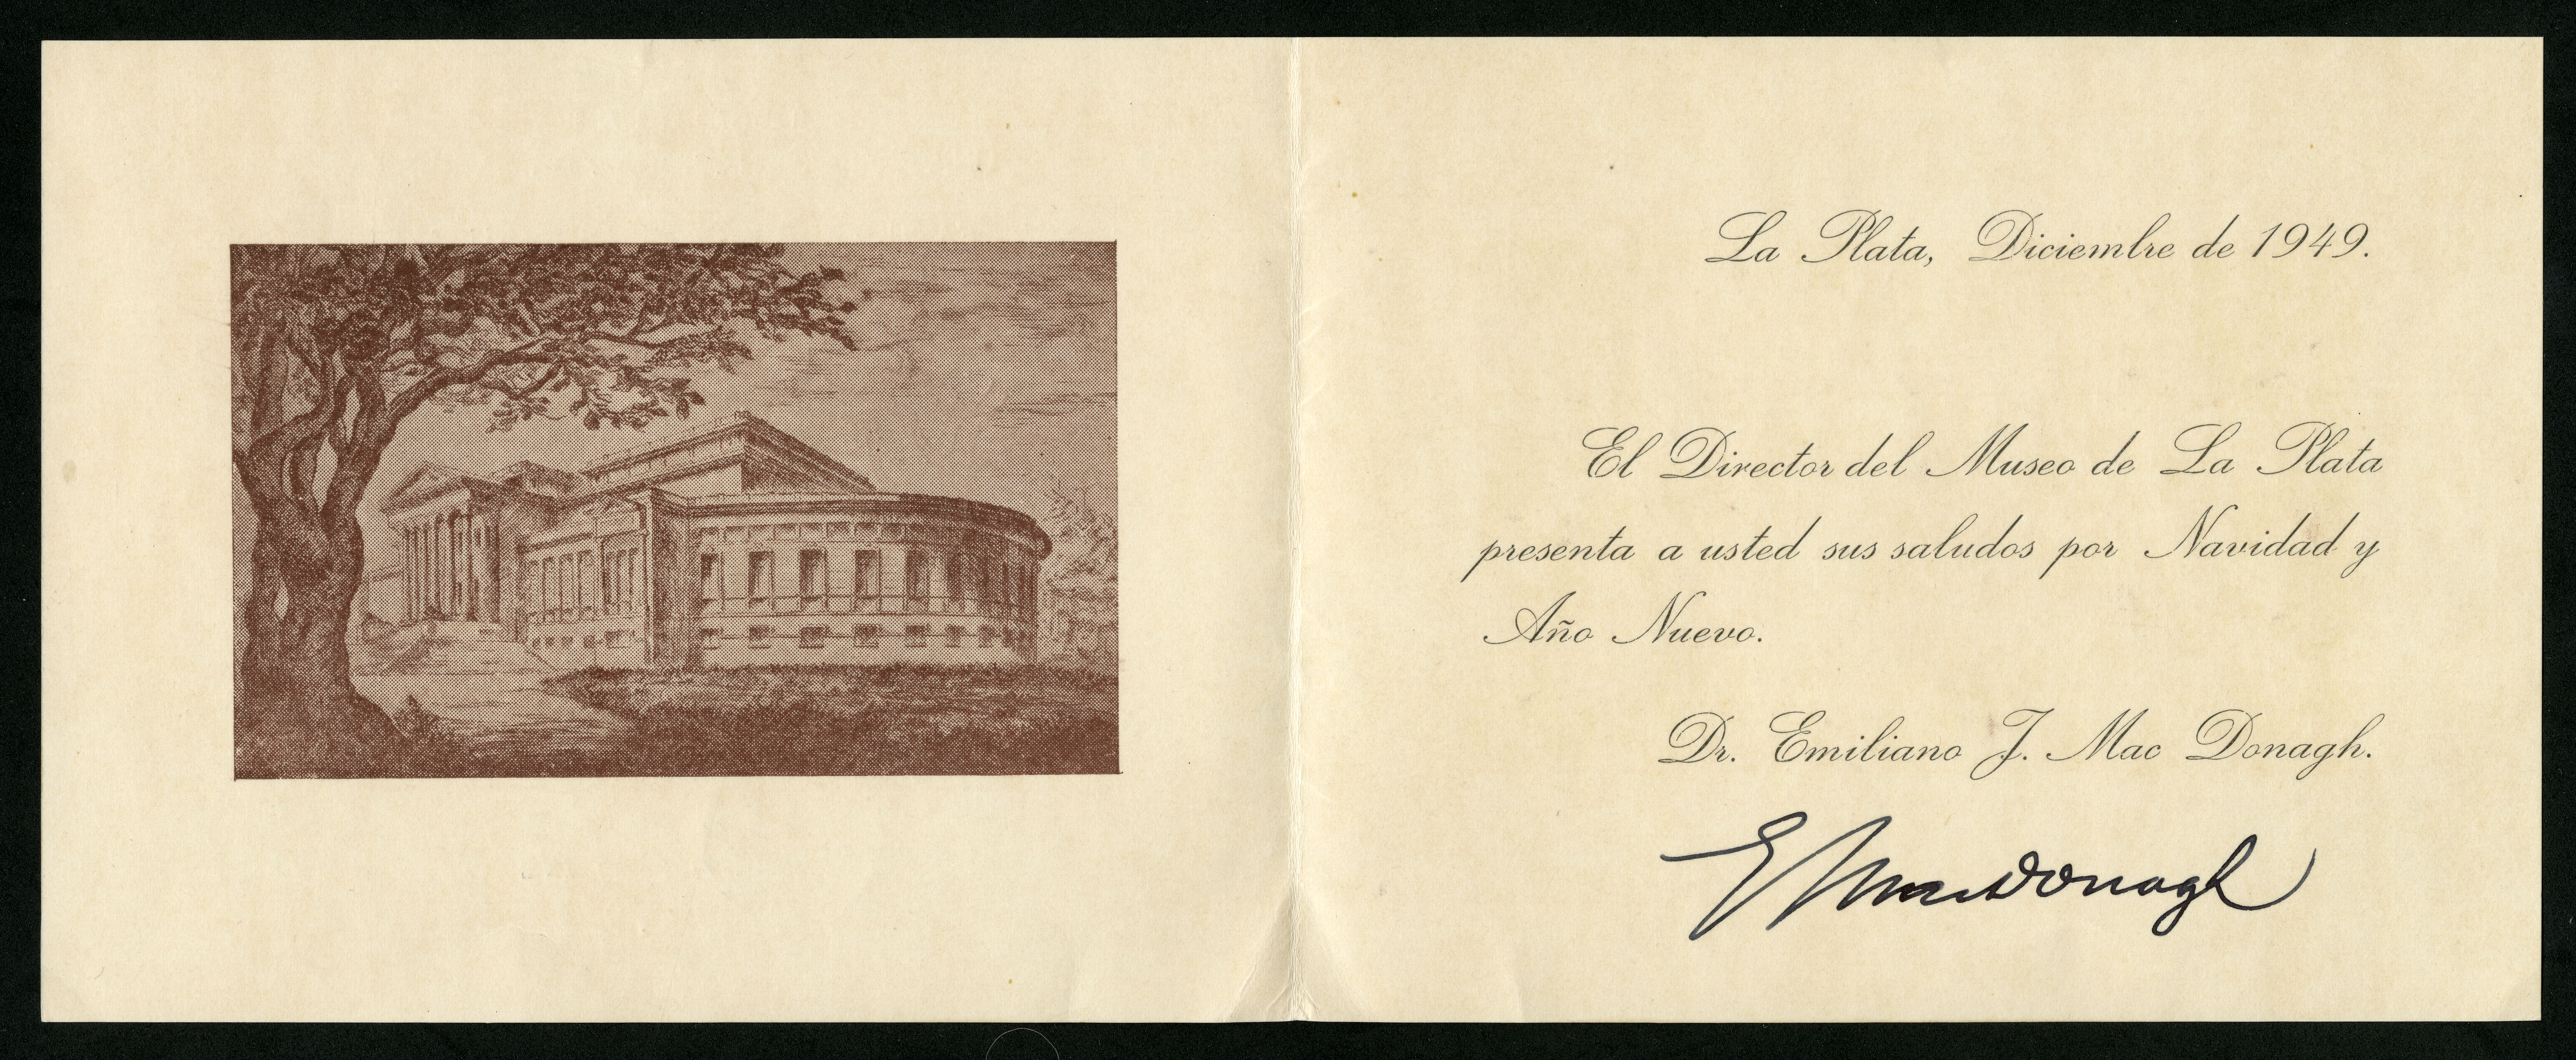 Inside of a Holiday Card from Dr. Emiliano MacDonagh to Isaac Ginsburg.